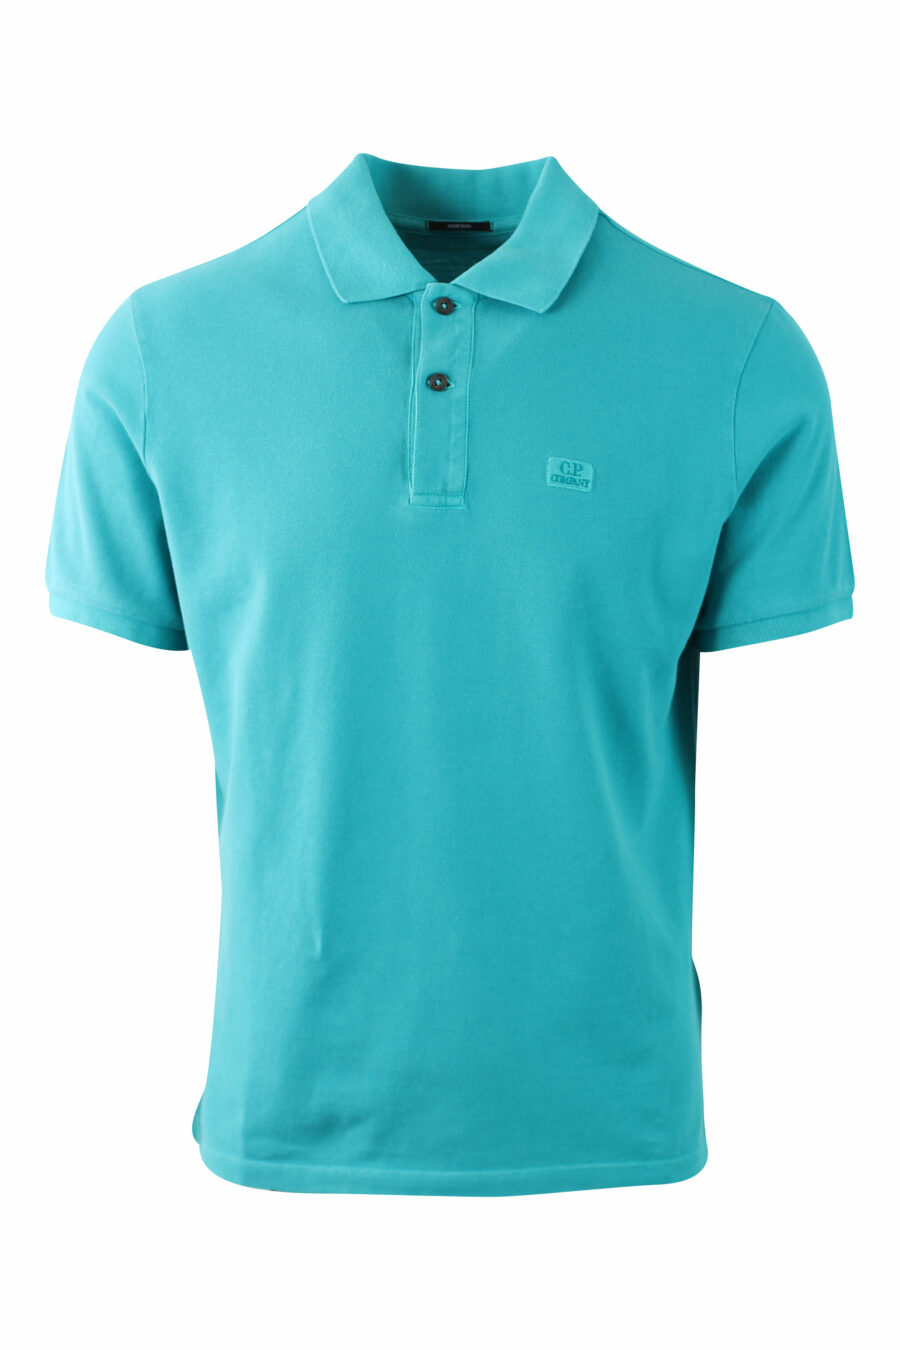 Turquoise polo shirt with mini logo patch - IMG 0059